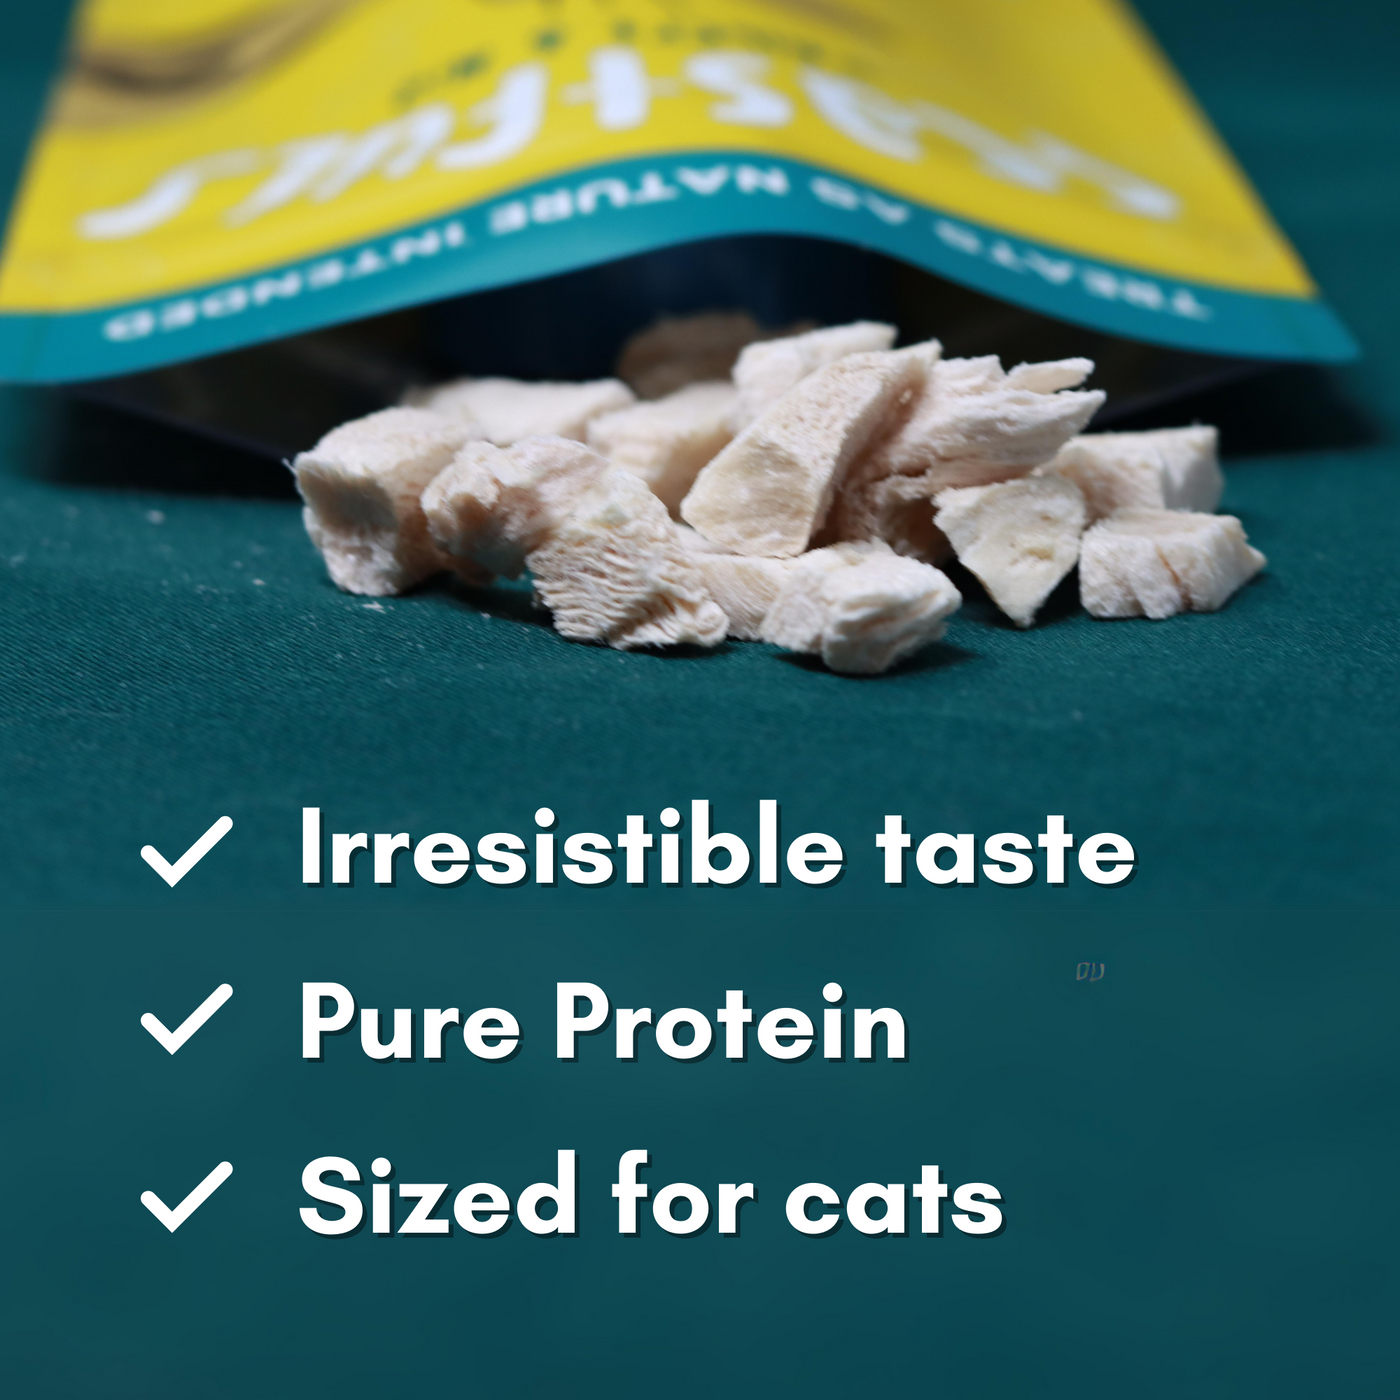 Feastfuls Cat Treats made with 100% chicken breast